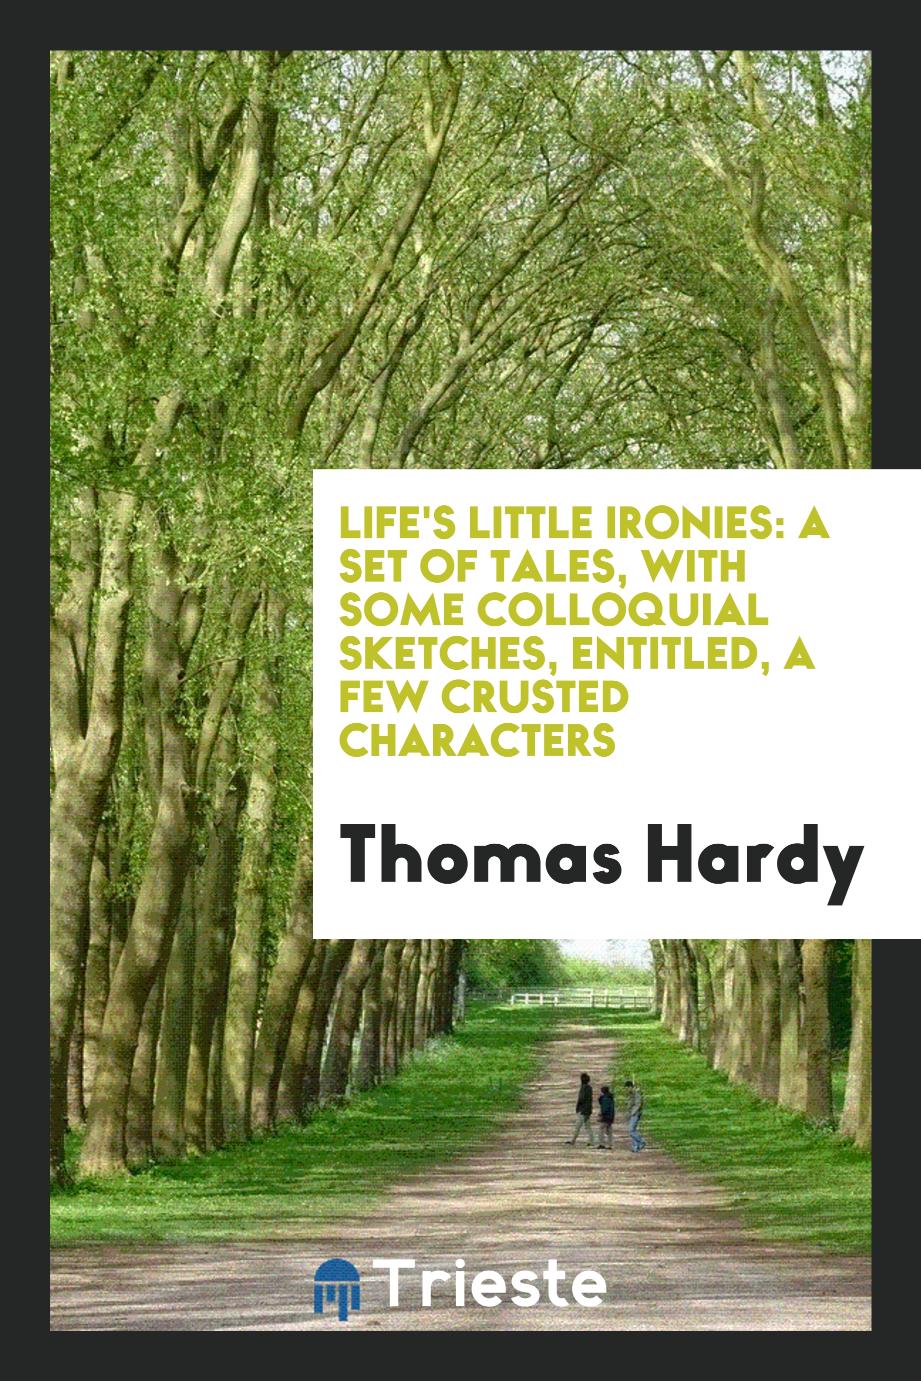 Life's little ironies: a set of tales, with some colloquial sketches, entitled, A few crusted characters